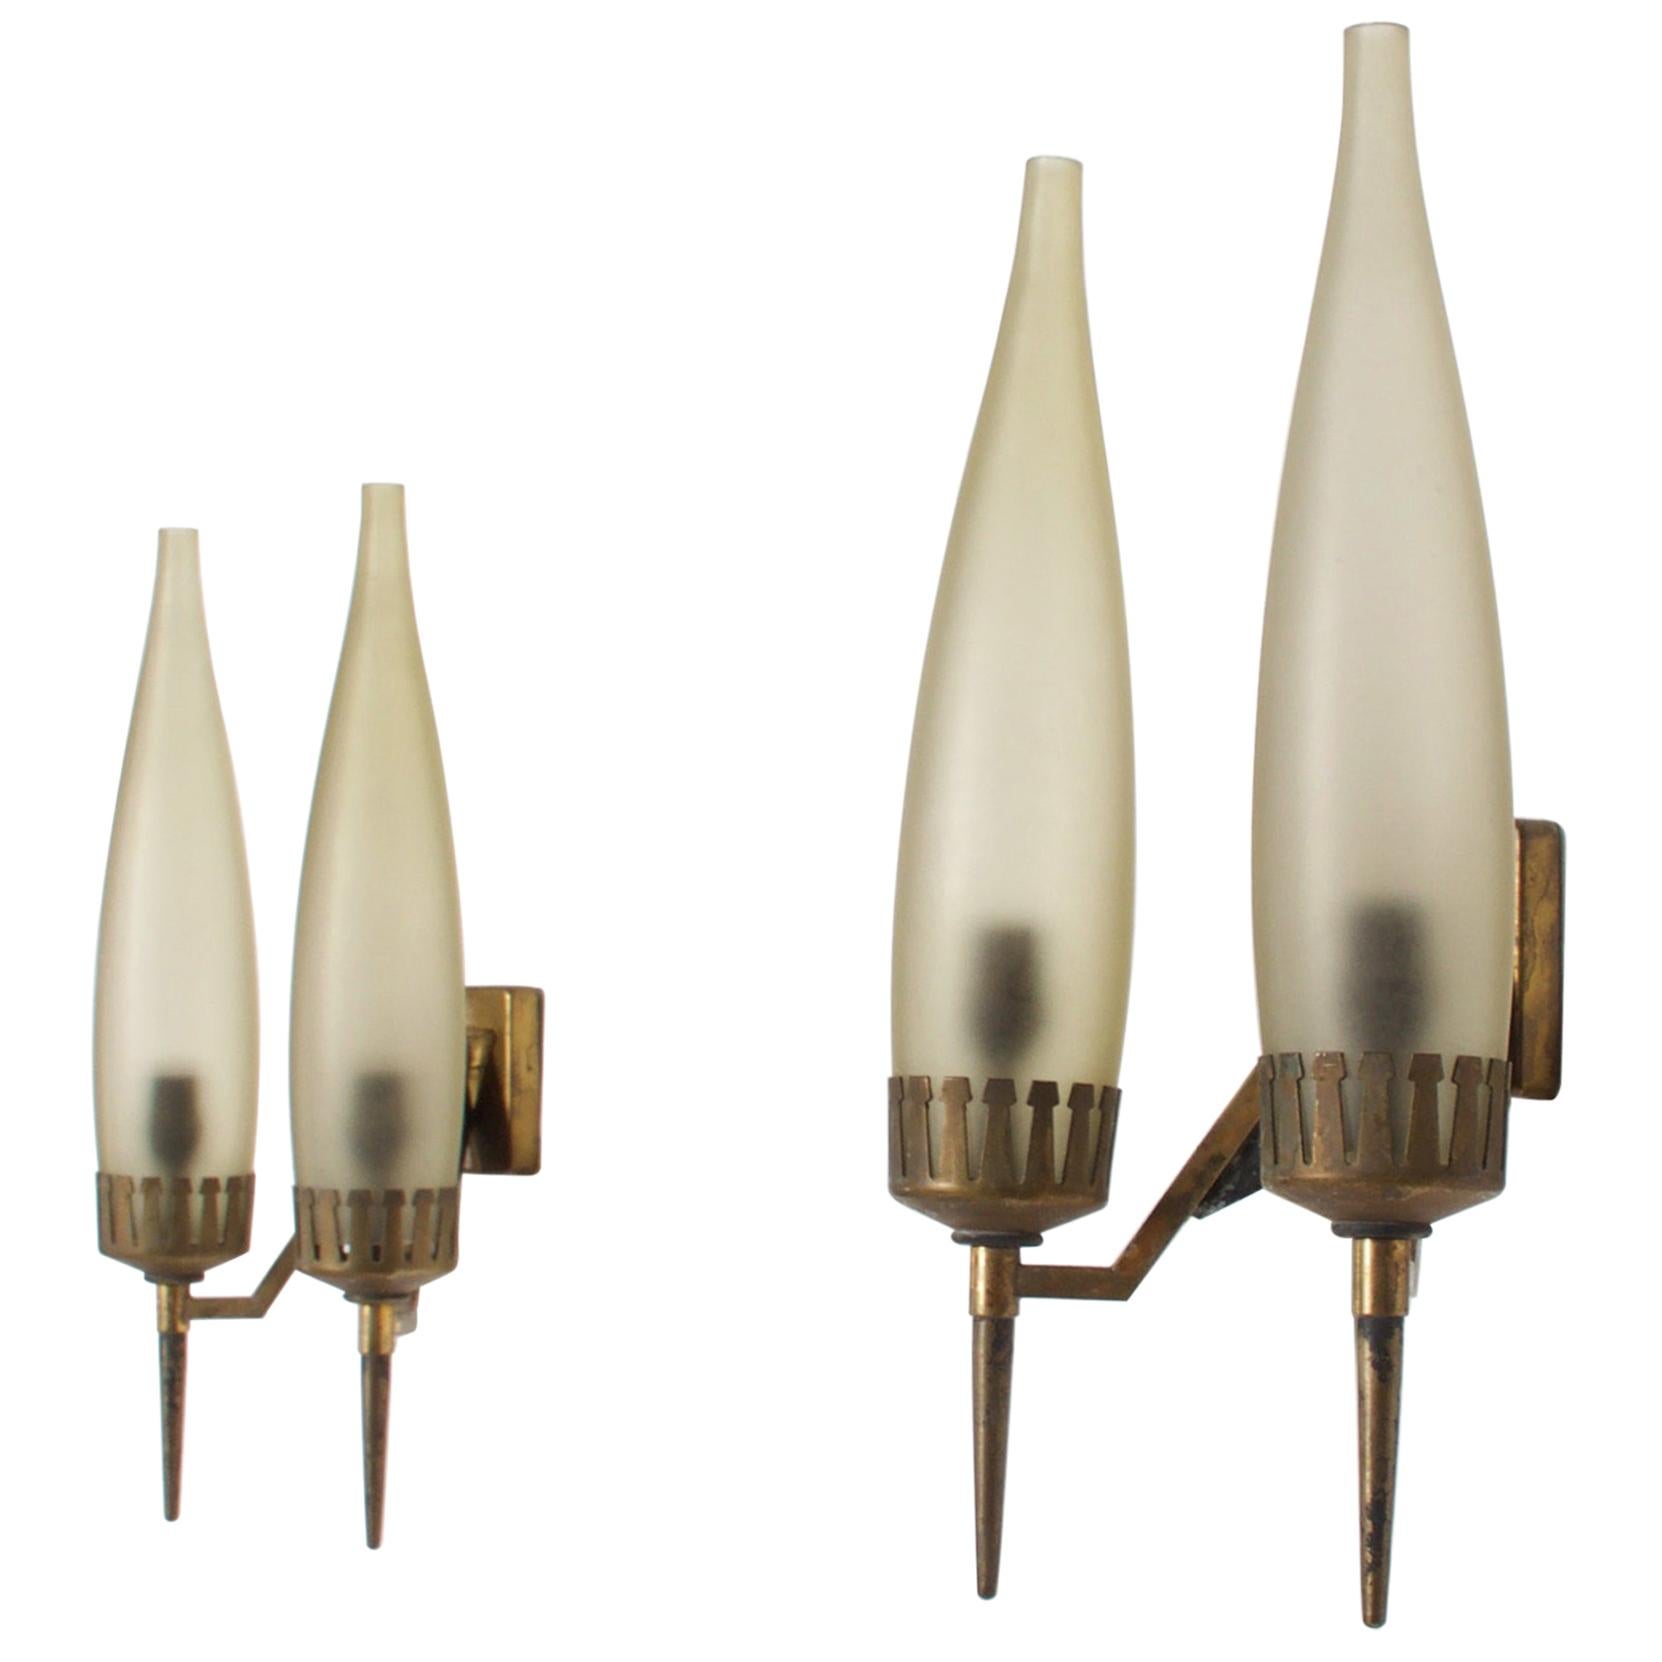 1950s Gio Ponti Italy Candelabra Wall Sconce Pair Brass Crown Tapered Glass